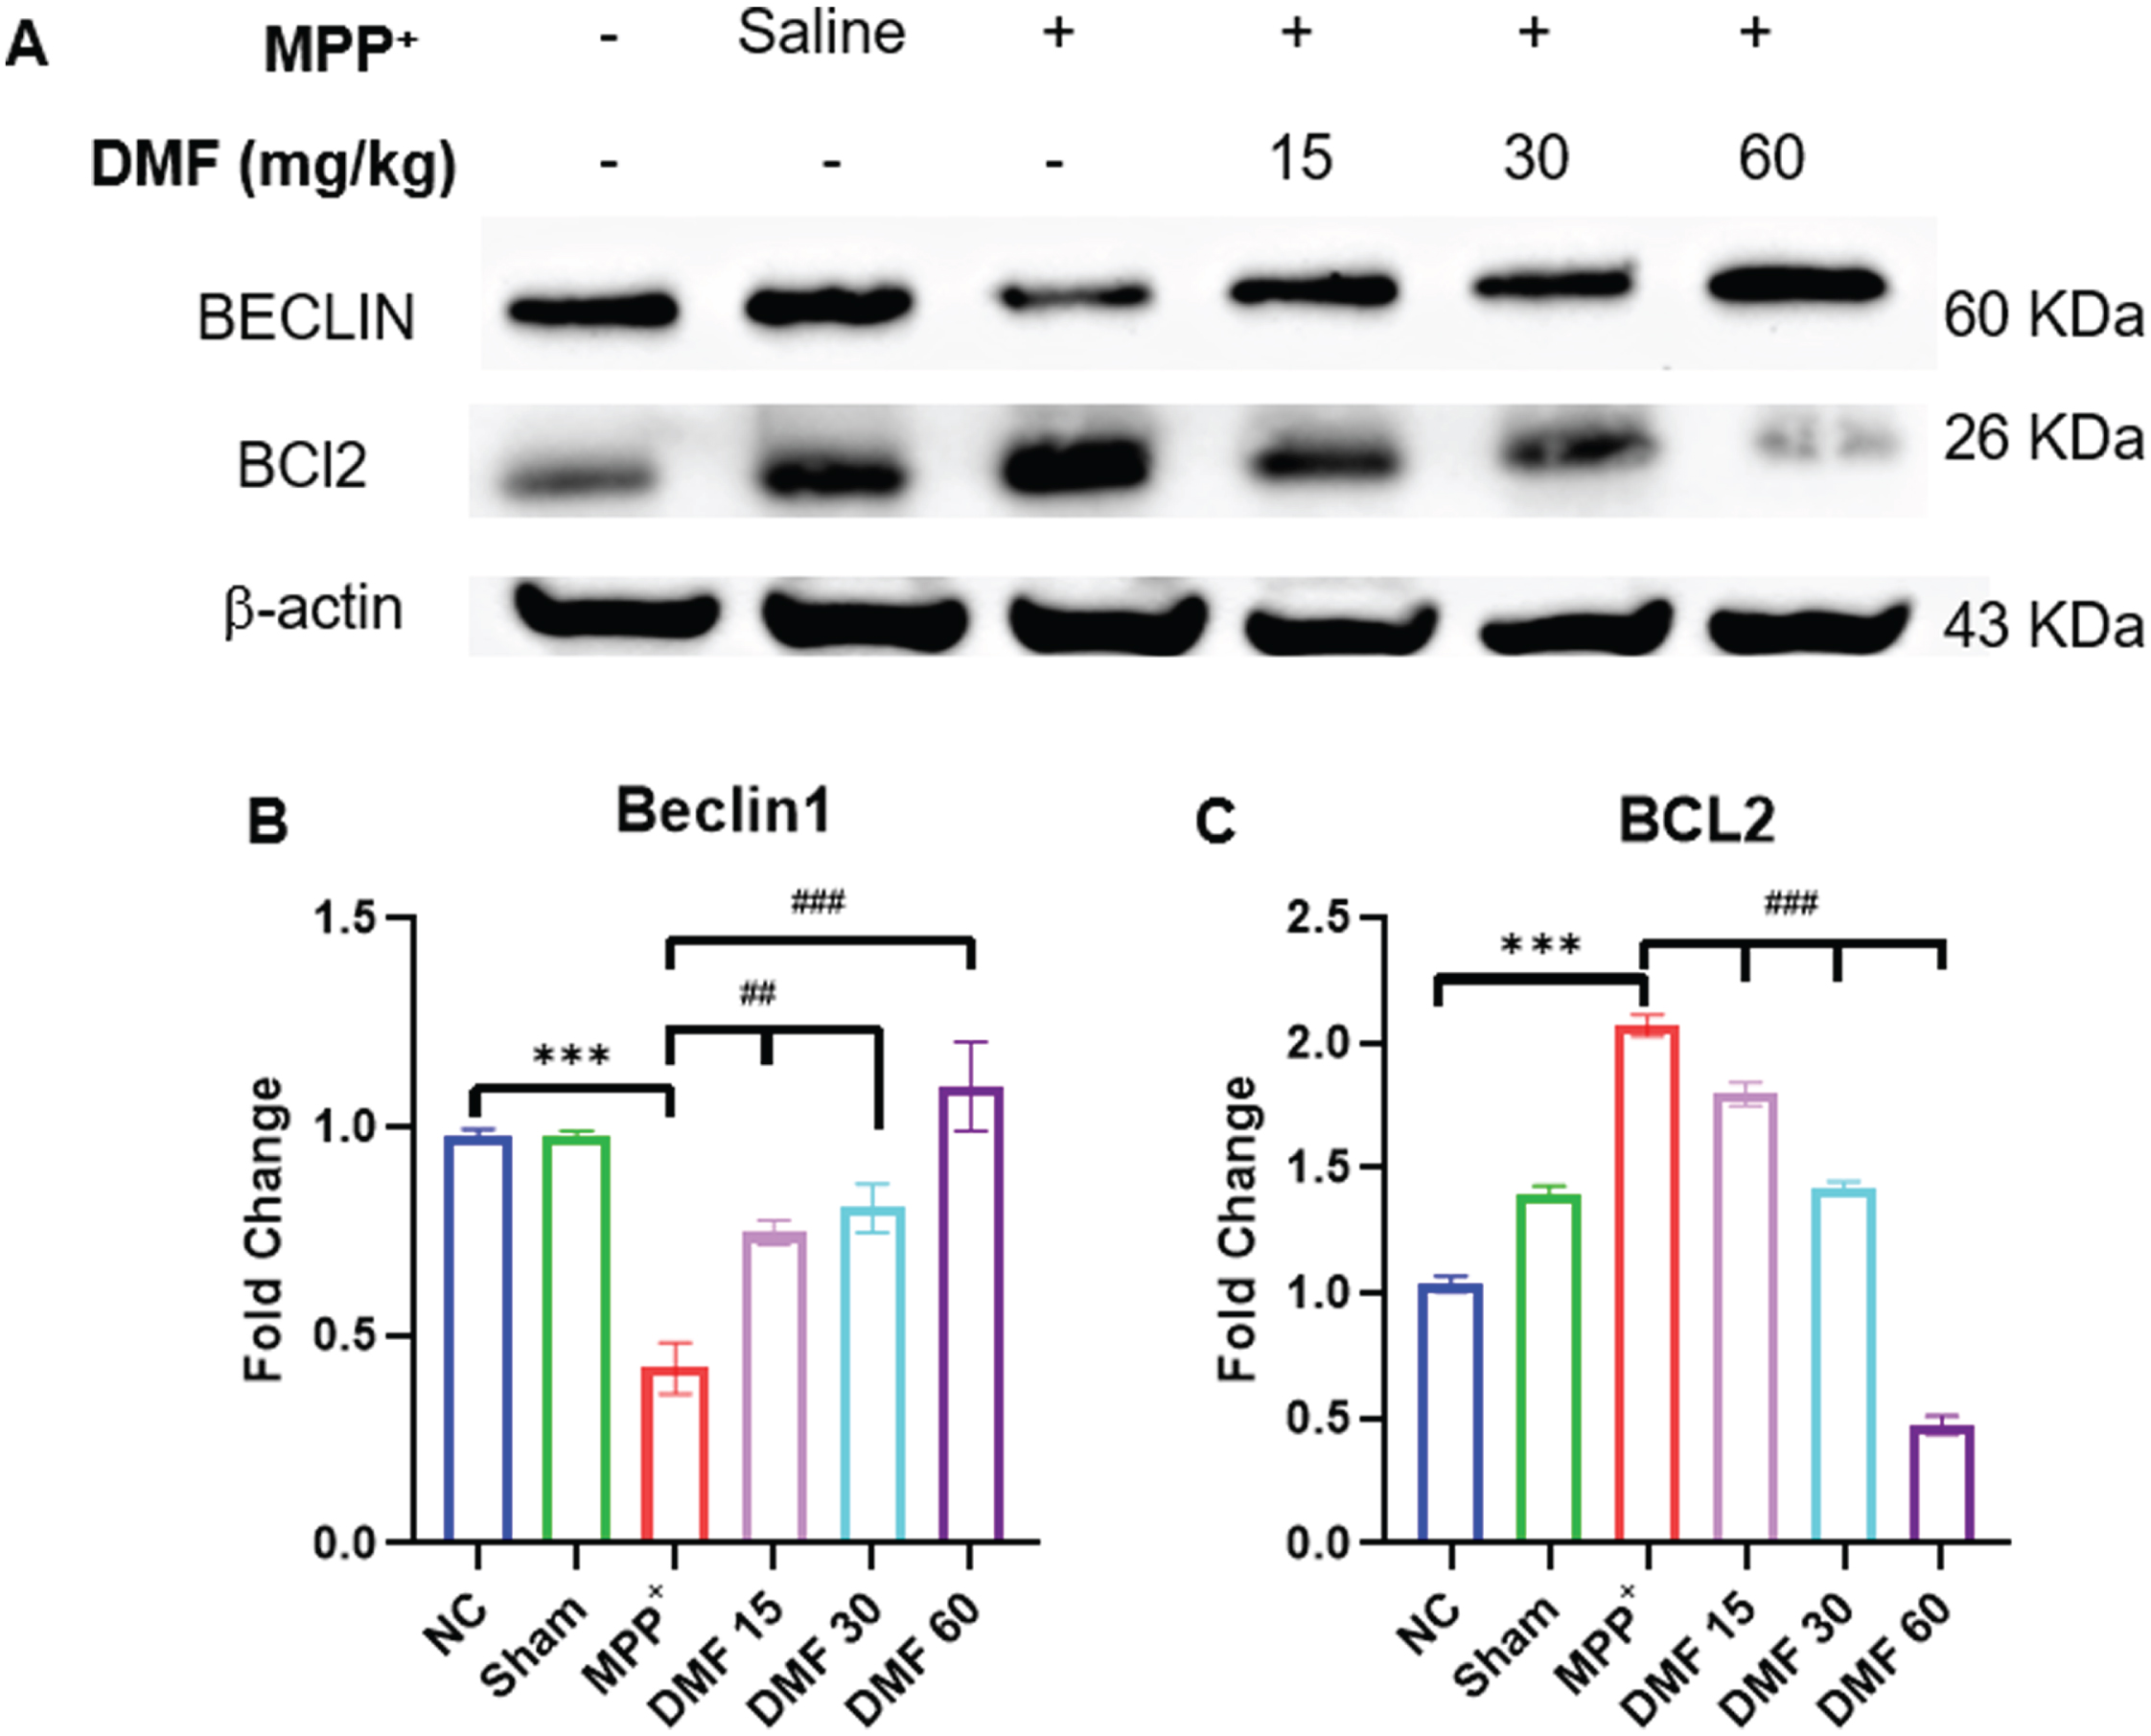 A) Image of western blots of proteins Beclin1 and BCL2 B) Quantitative analysis of Beclin1 (DF = 12) C) Quantitative analysis of BCL2 (DF = 12); n = 3; Data represents mean±SEM. The p-values were calculated using a one-way analysis of variance using Bonferroni method (ANOVA). ***p < 0.001 versus NC; # p < 0.05, # # p < 0.01, # # # p < 0.001 versus DC.